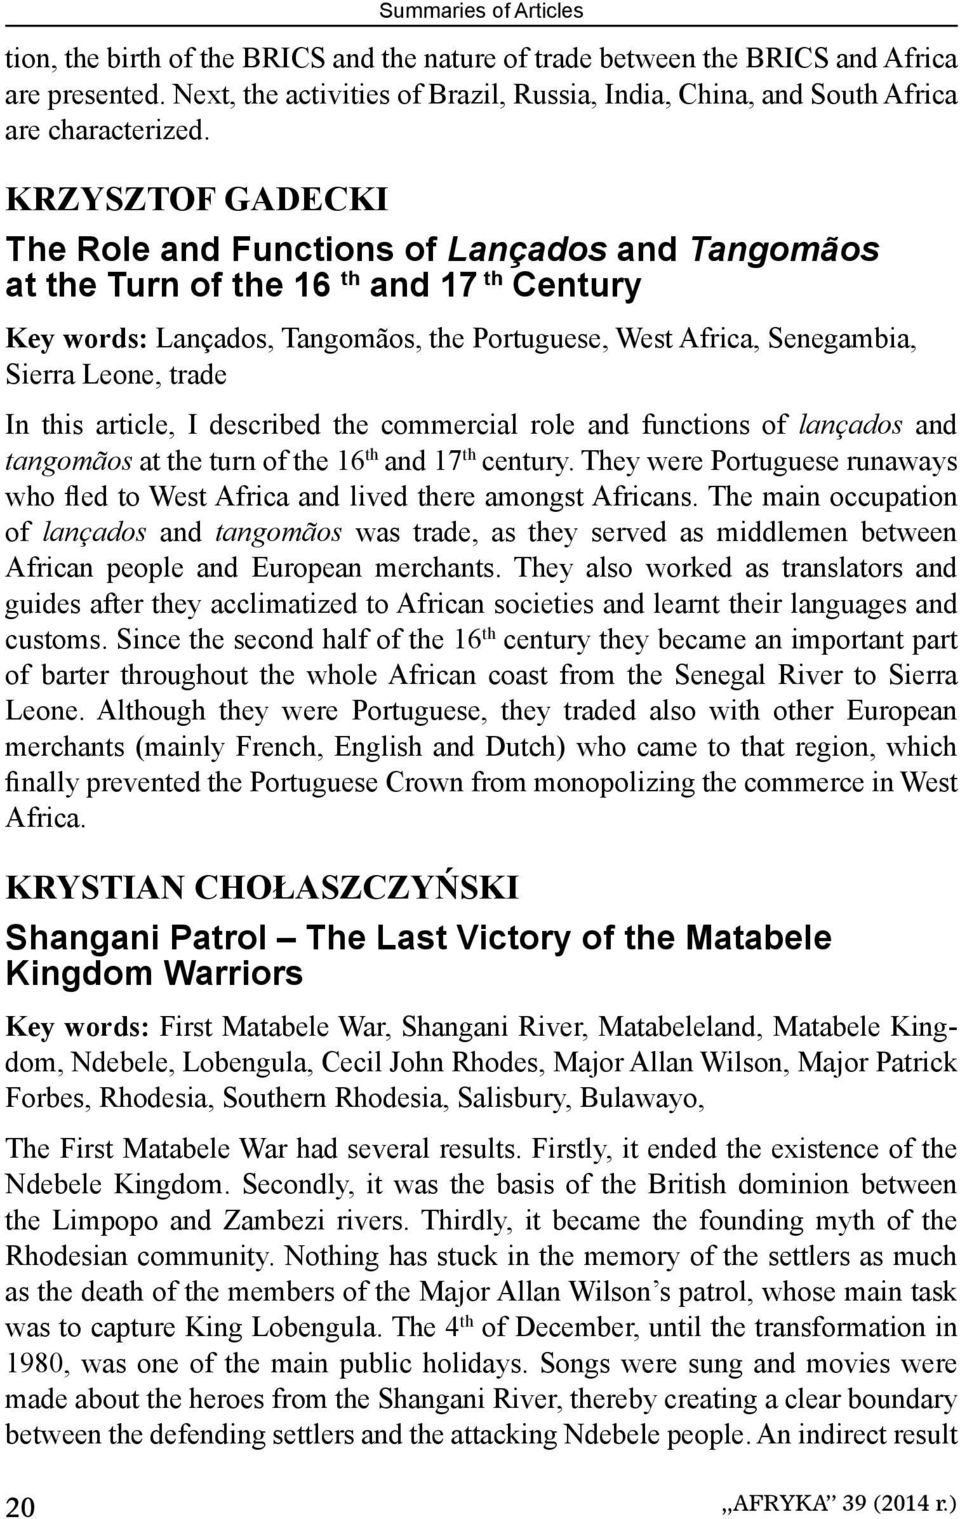 KRZYSZTOF GADECKI The Role and Functions of Lançados and Tangomãos at the Turn of the 16 th and 17 th Century Key words: Lançados, Tangomãos, the Portuguese, West Africa, Senegambia, Sierra Leone,